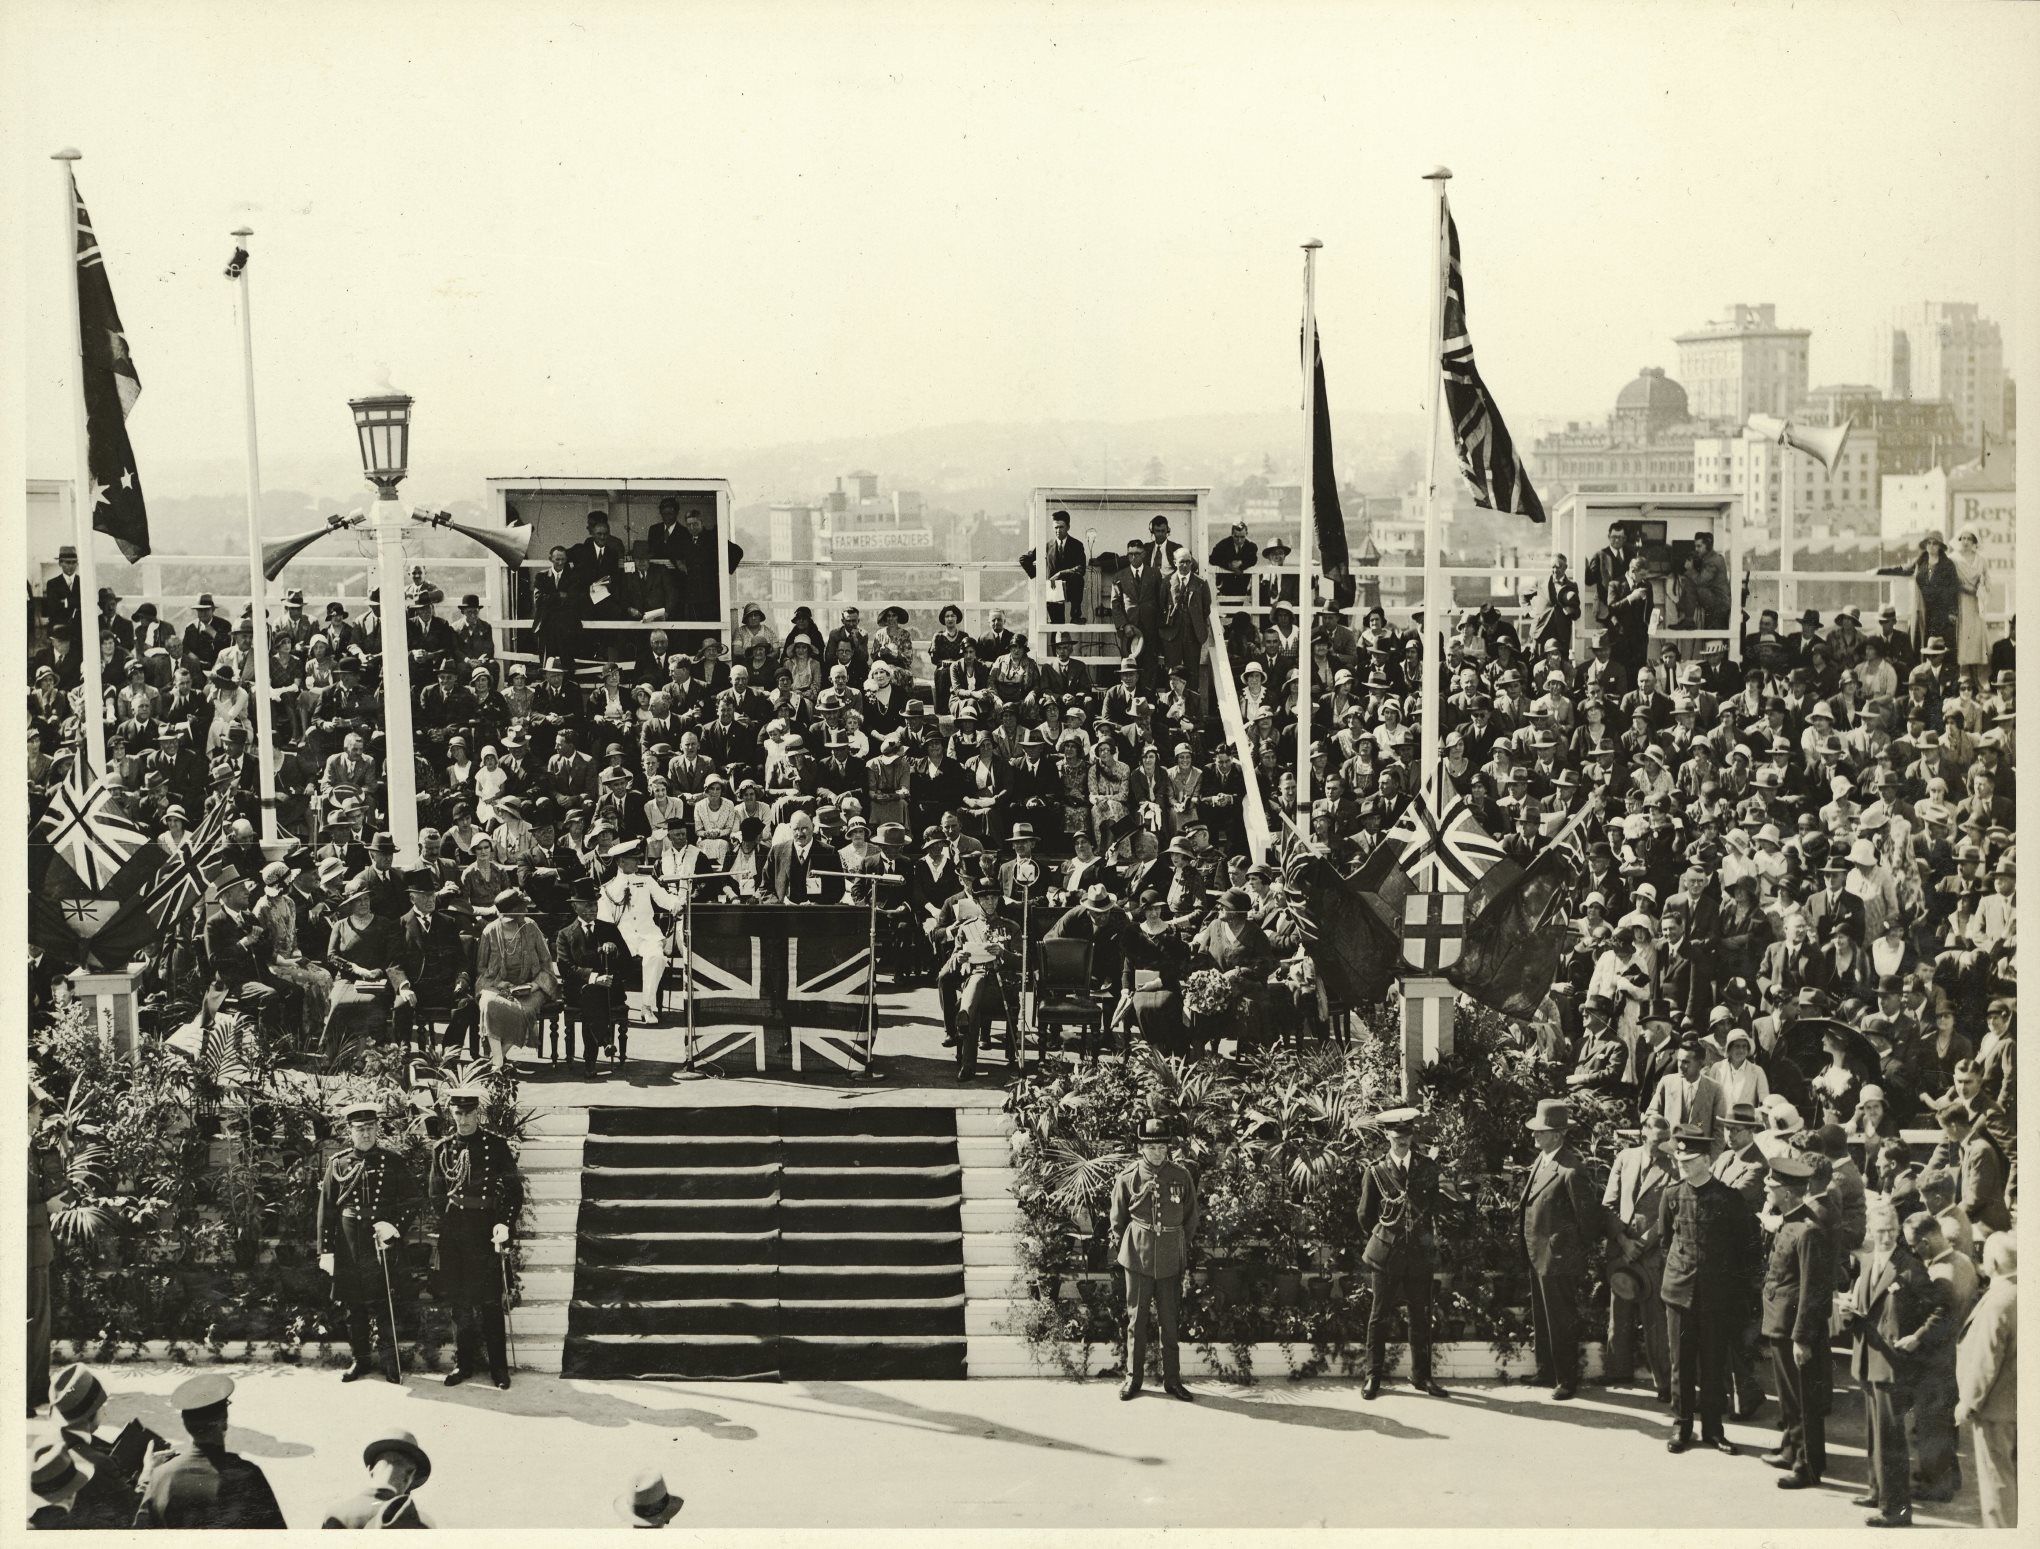 A crowd watches a man speak from a podium that is decorated with the union jack to 